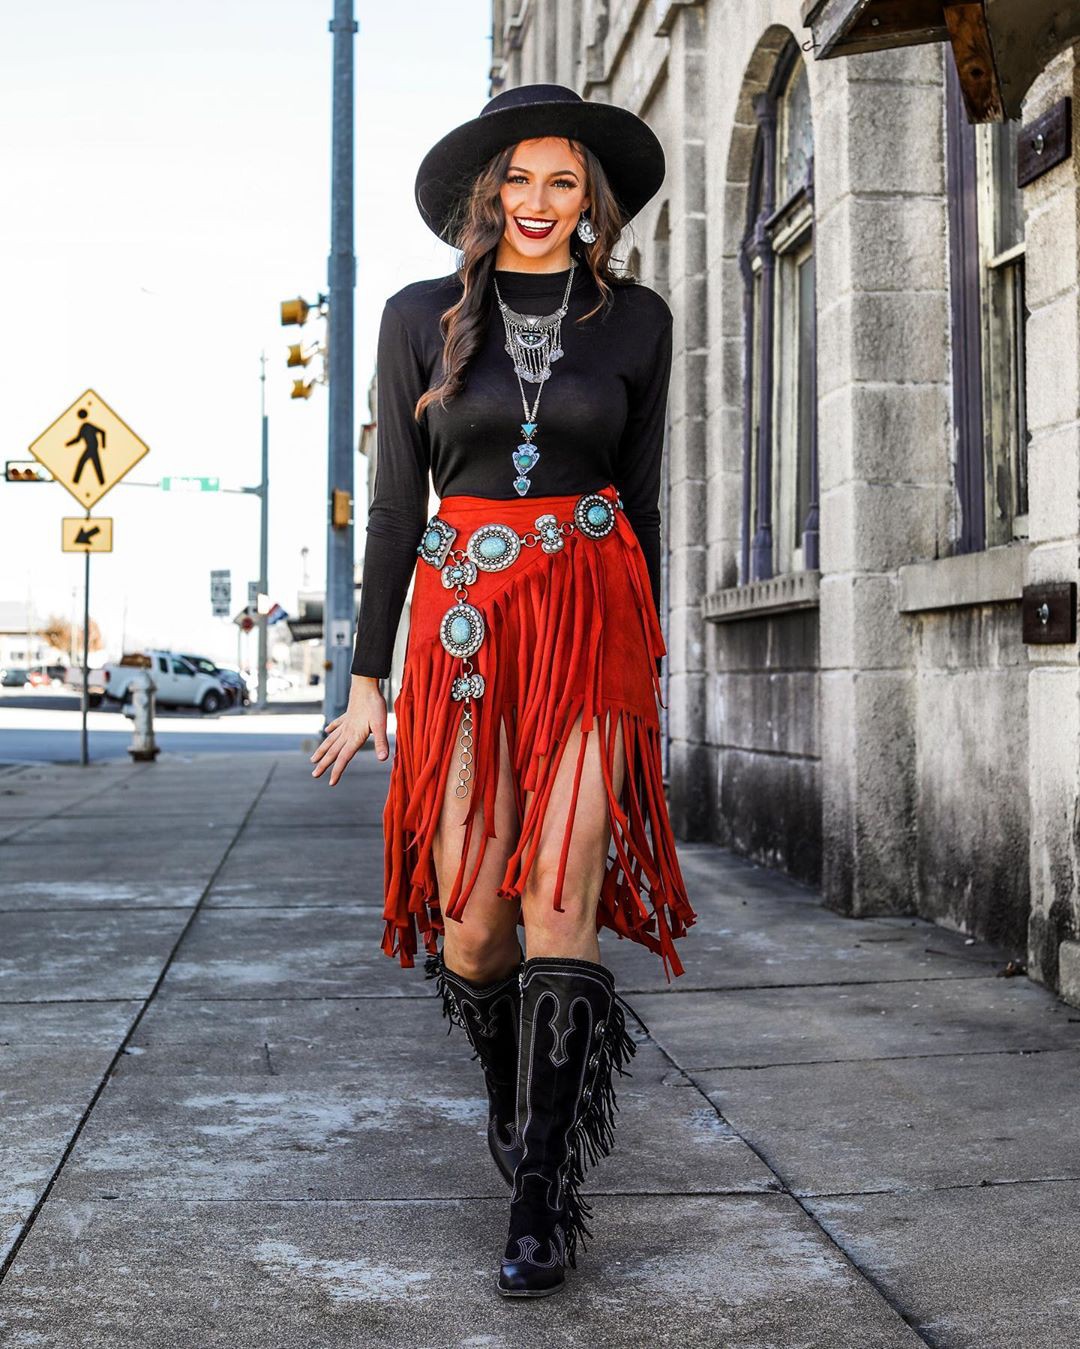 Classy Cowgirl Fashion | Cowgirl Outfits Ideas | country feminina ...